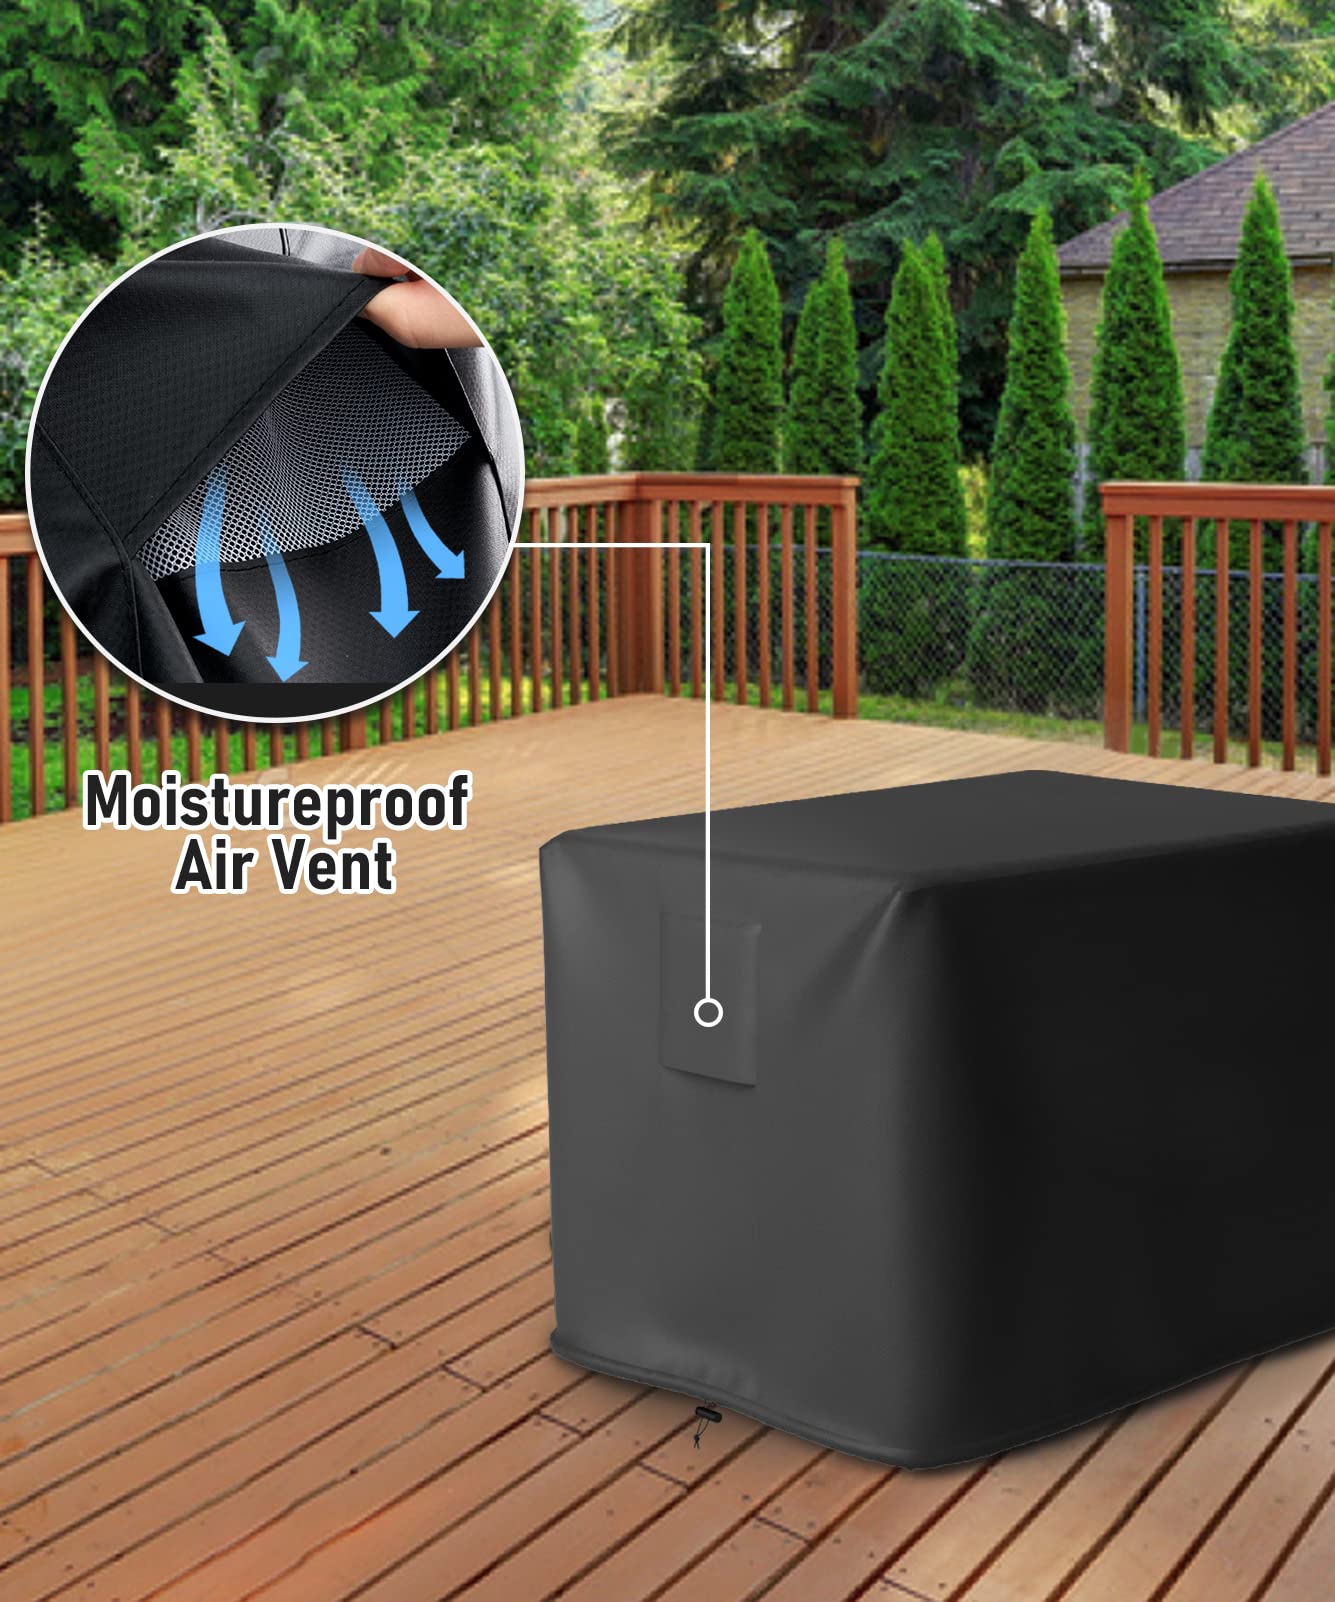 SHINESTAR Universal Generator Cover 26 x 20 x 20 inch - for 3000-5000 Watt Portable Generators, for Westinghouse, Champion, WEN, DuroMax and More, Heavy Duty Waterproof 600D Polyester, Black